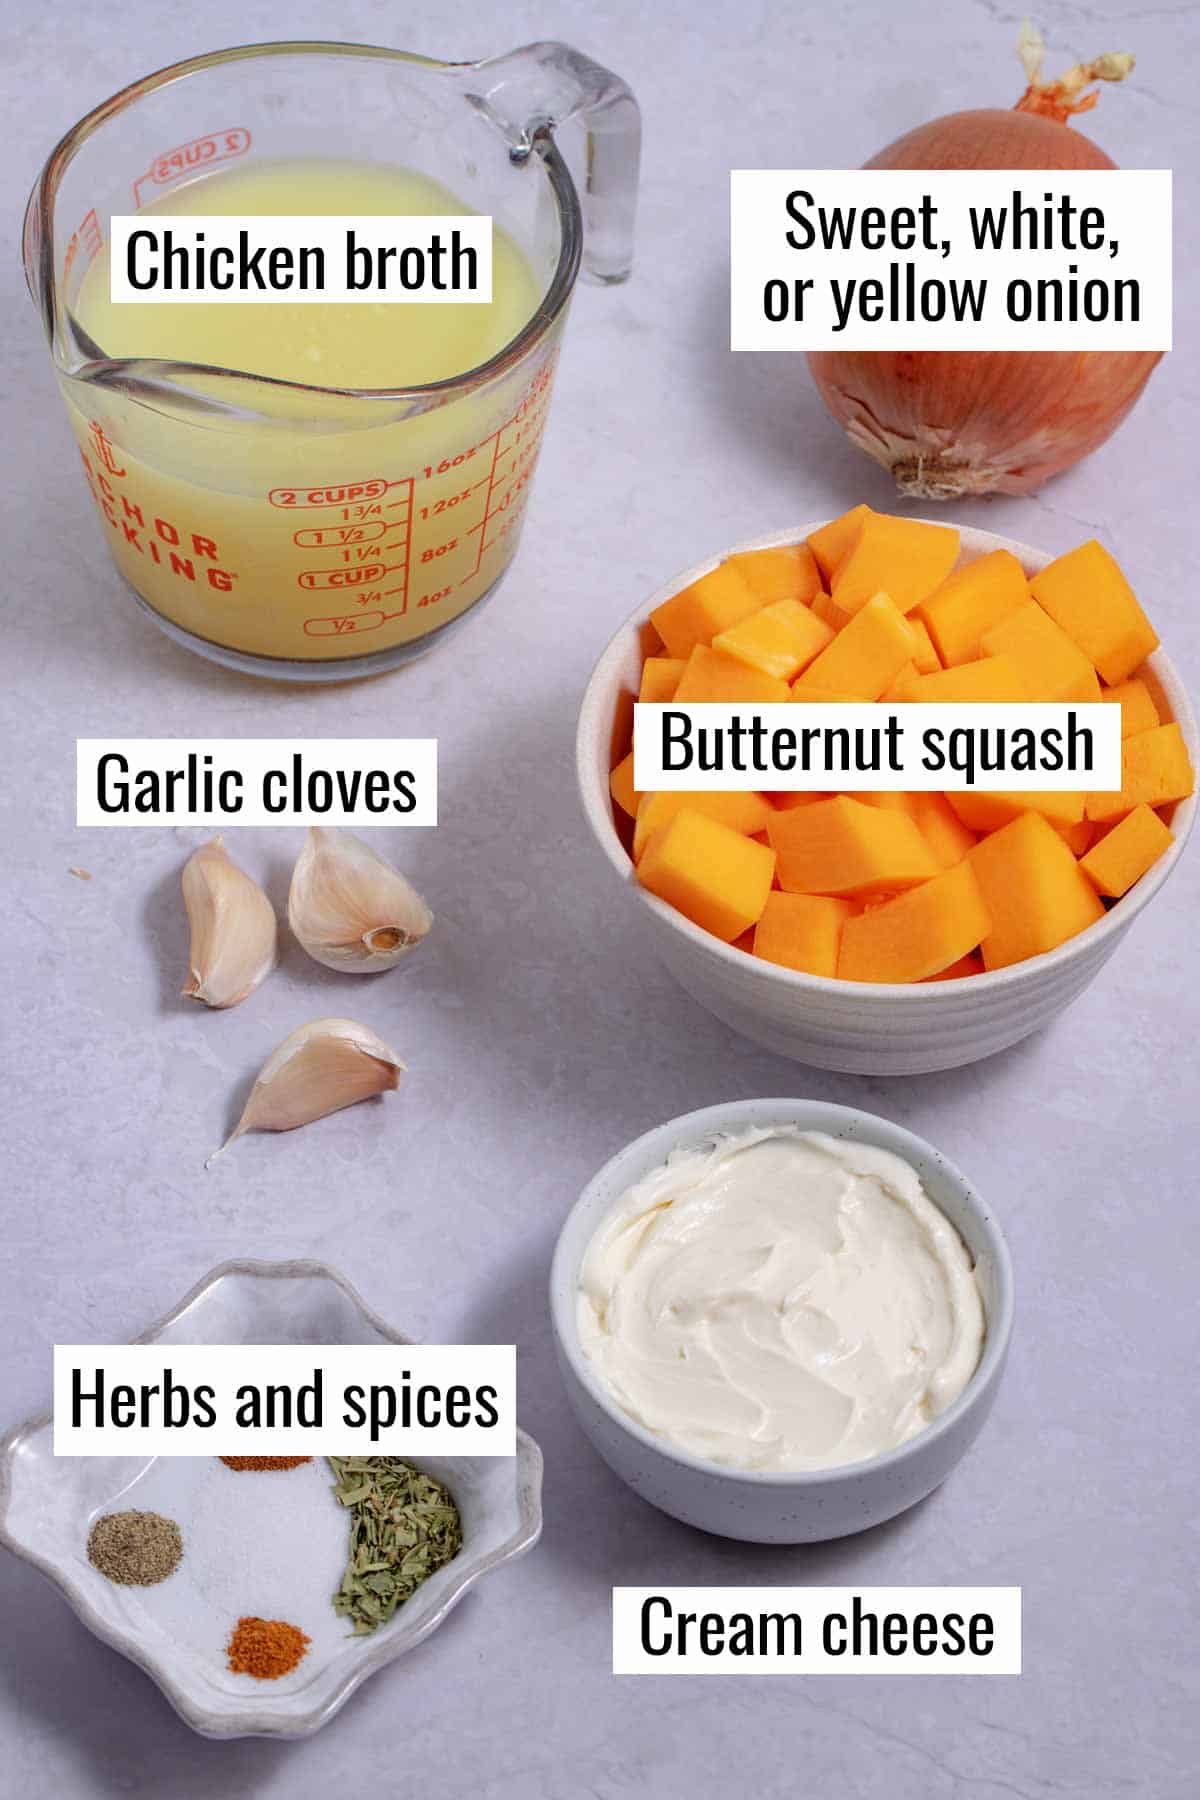 Ingredients for butternut squash soup with cream cheese.